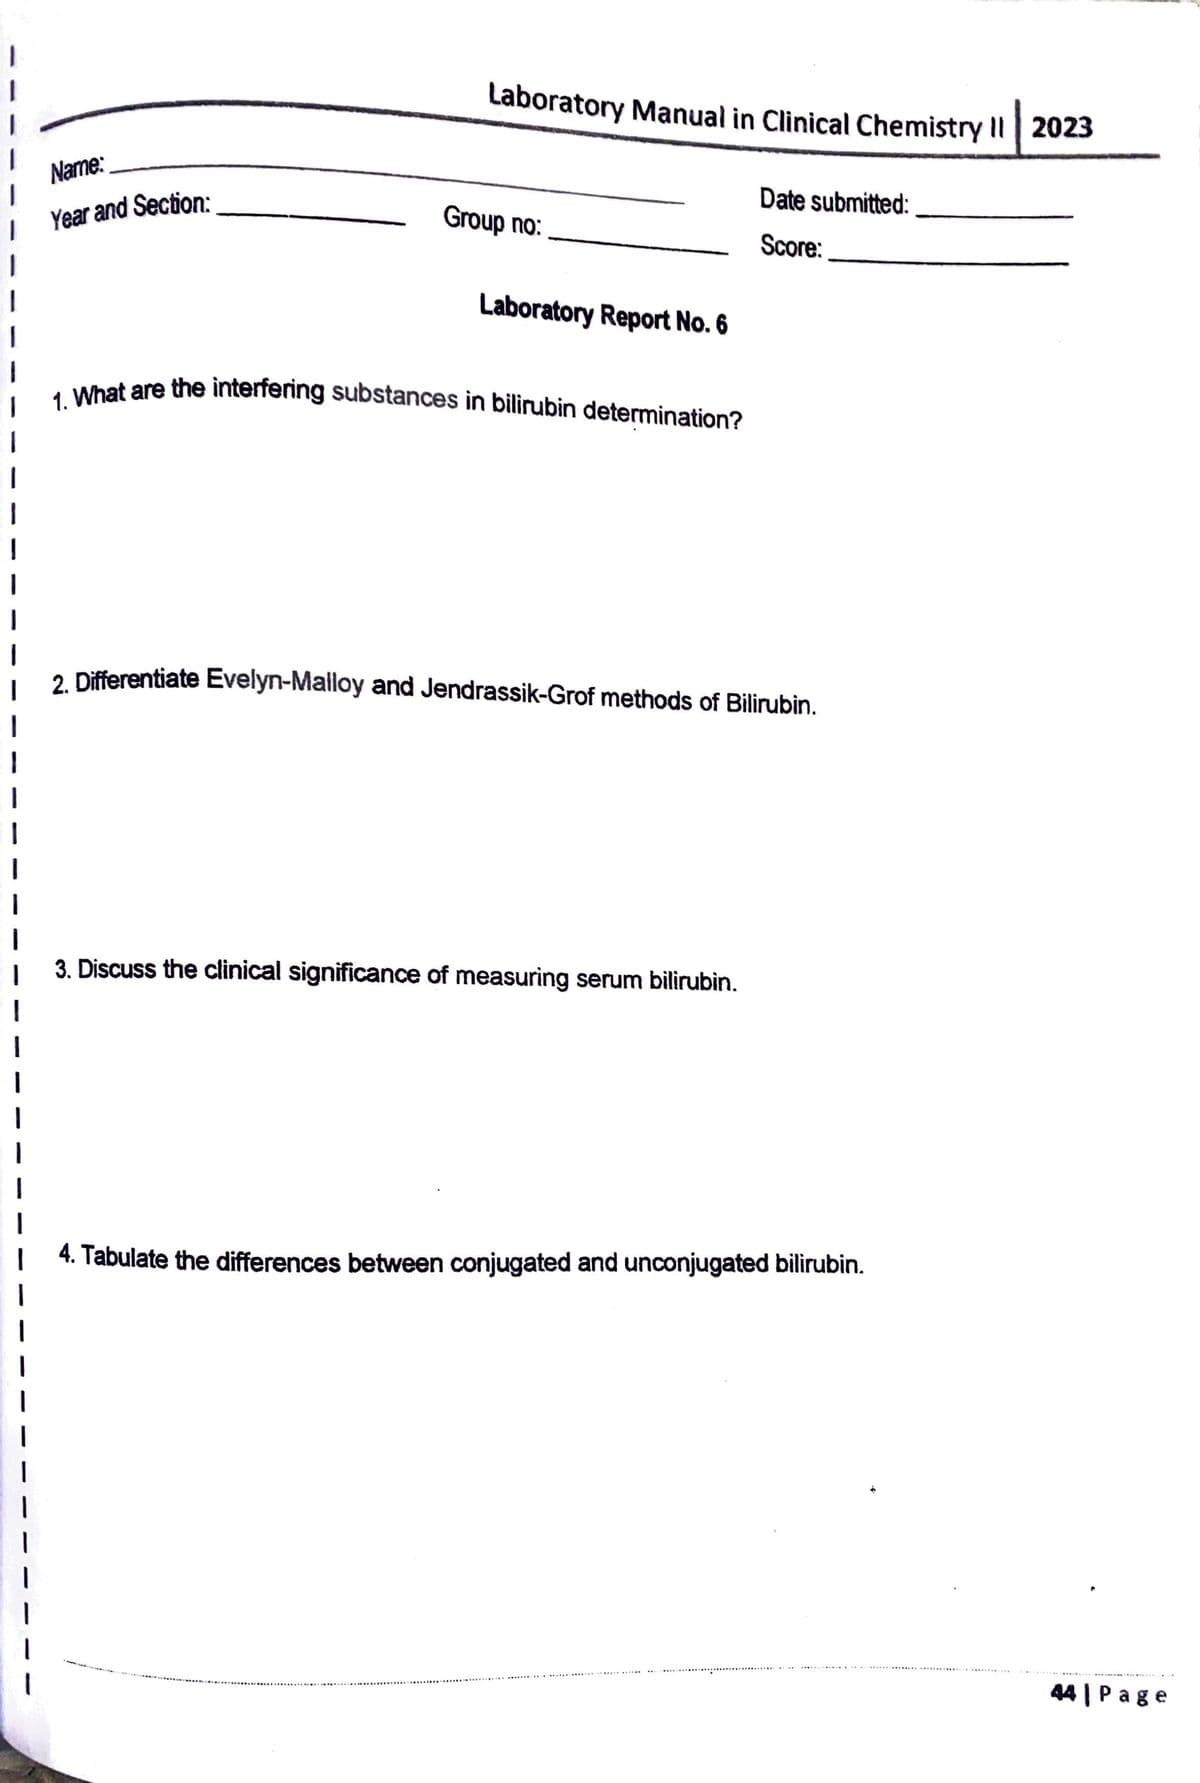 Name:
Year and Section:
Laboratory Manual in Clinical Chemistry II 2023
Group no:
Laboratory Report No. 6
1. What are the interfering substances in bilirubin determination?
Date submitted:
Score:
2. Differentiate Evelyn-Malloy and Jendrassik-Grof methods of Bilirubin.
3. Discuss the clinical significance of measuring serum bilirubin.
4. Tabulate the differences between conjugated and unconjugated bilirubin.
44| Page